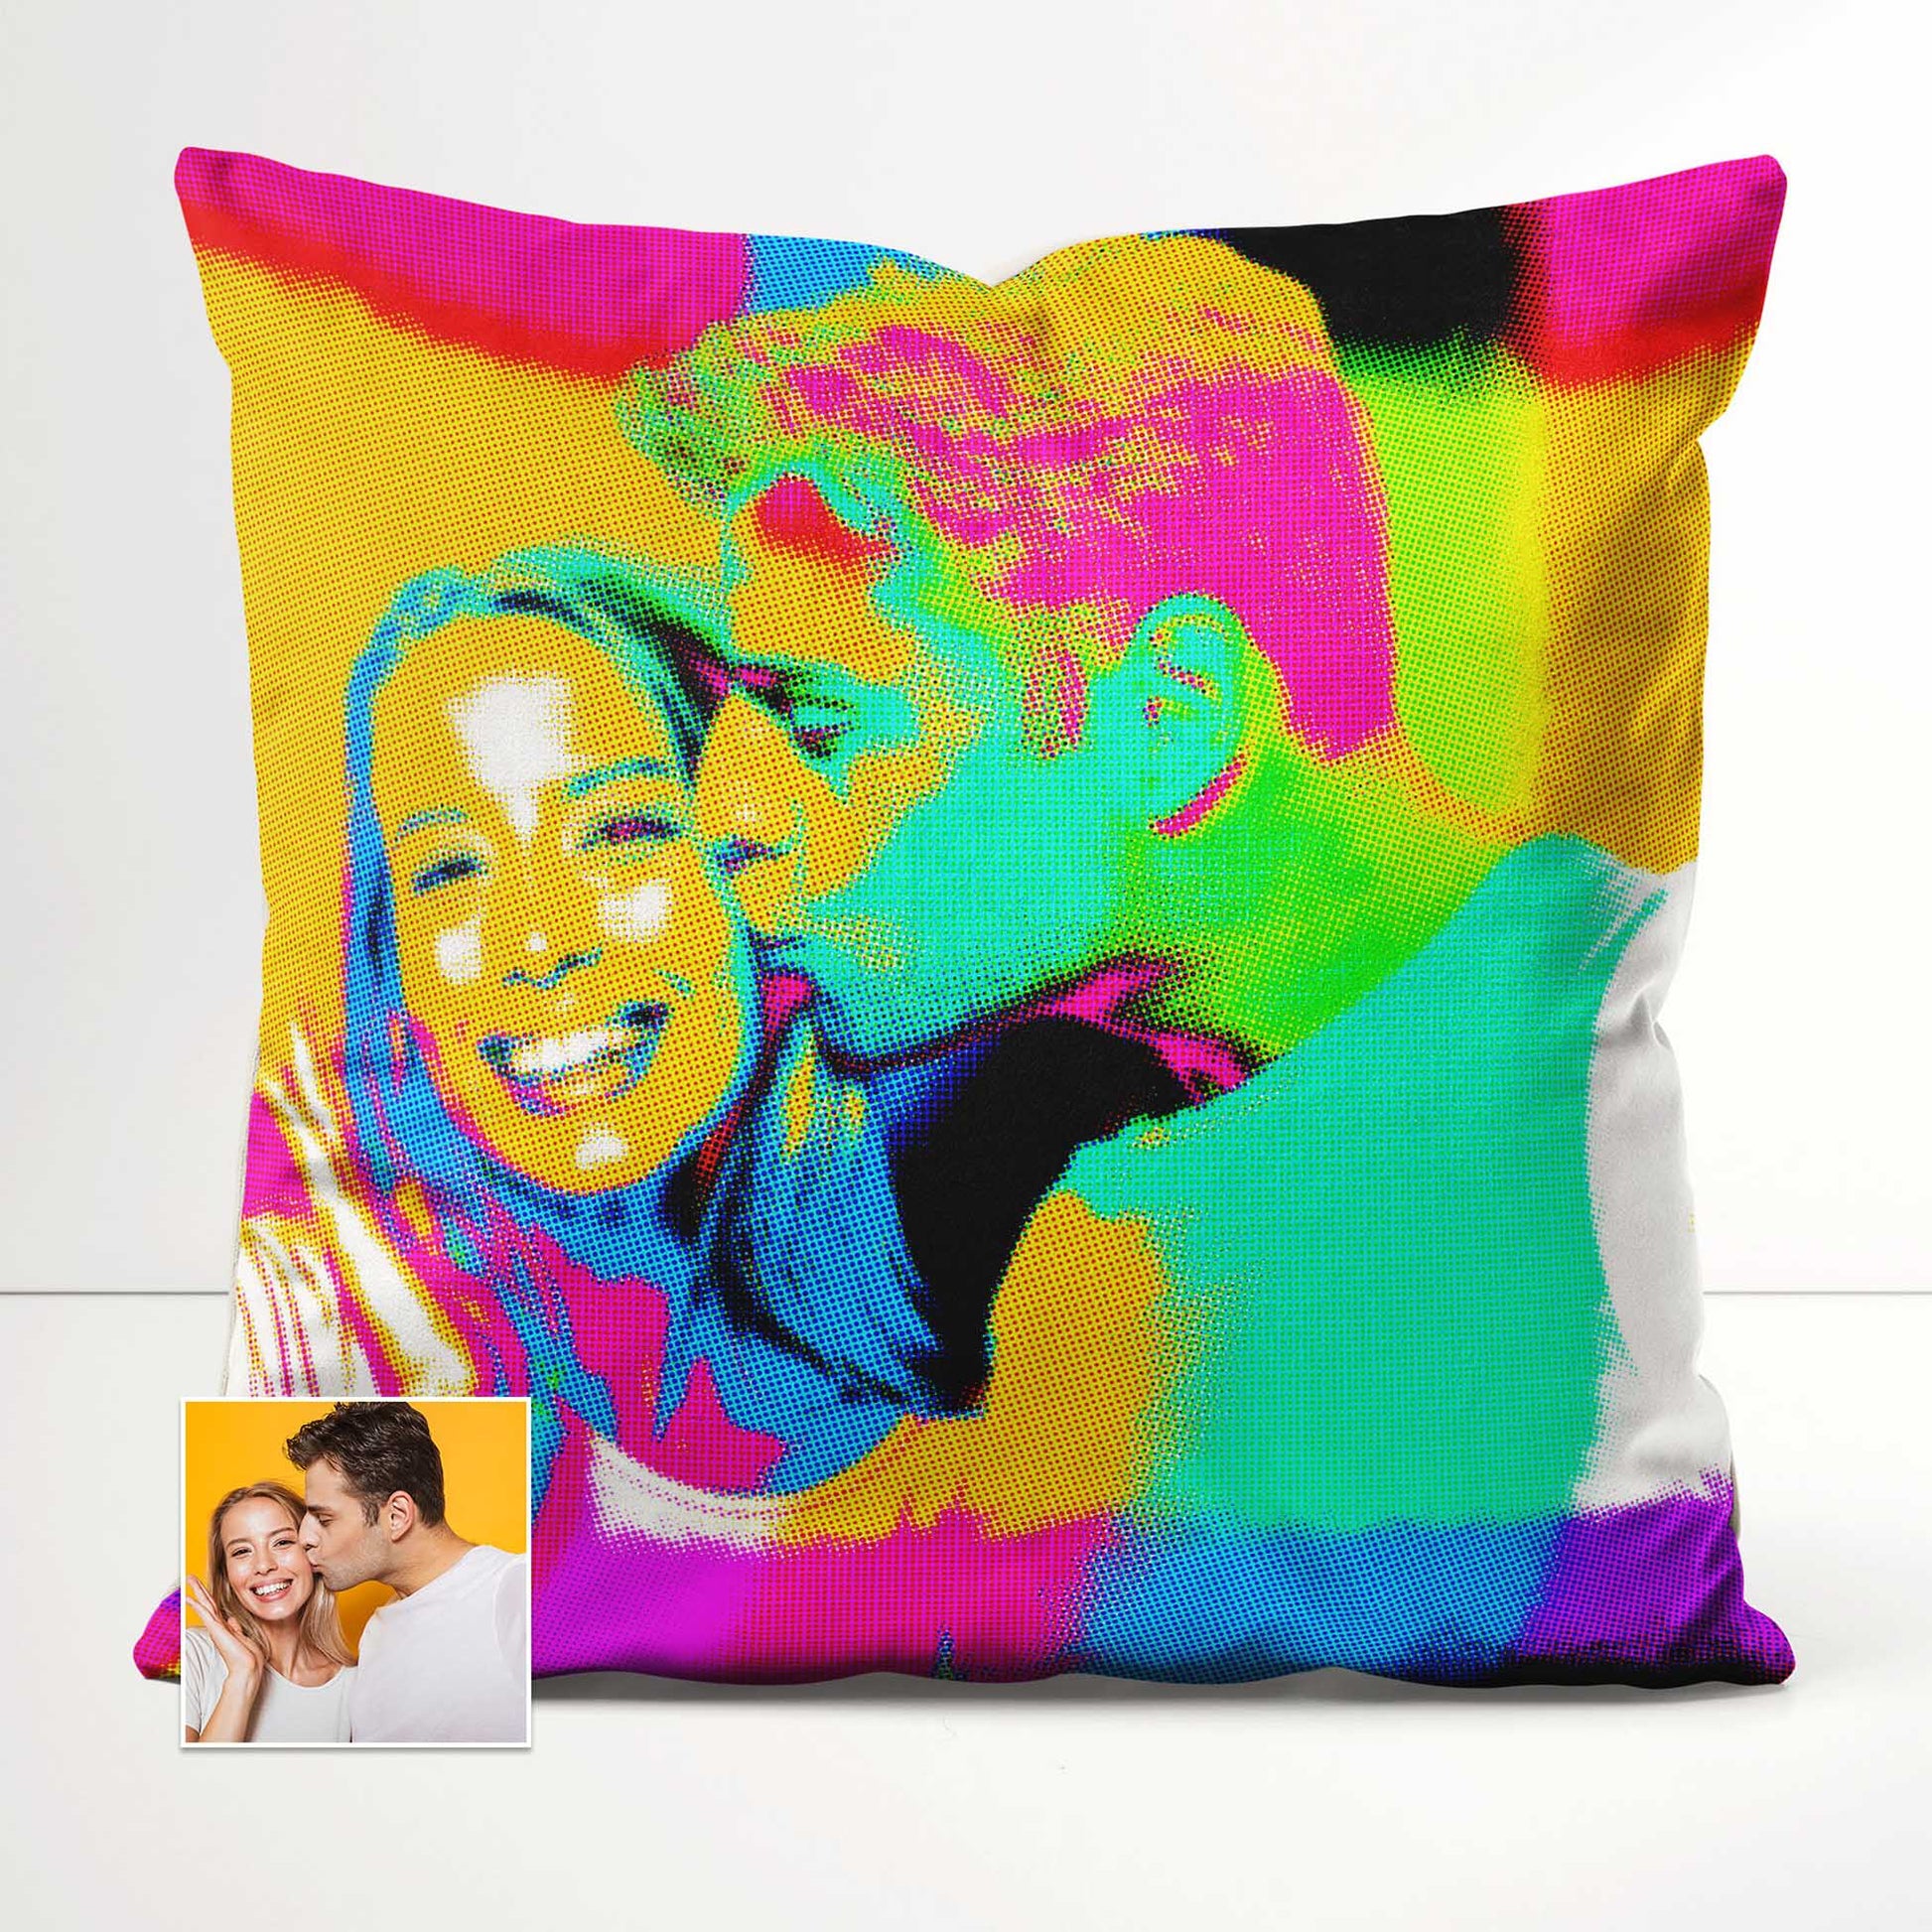 Add a touch of originality and creativity to your home decor with the Personalised Pop Art Cushion. Printed from your photo, it captures a unique and quirky design that sparks imagination. Handmade with soft velvet